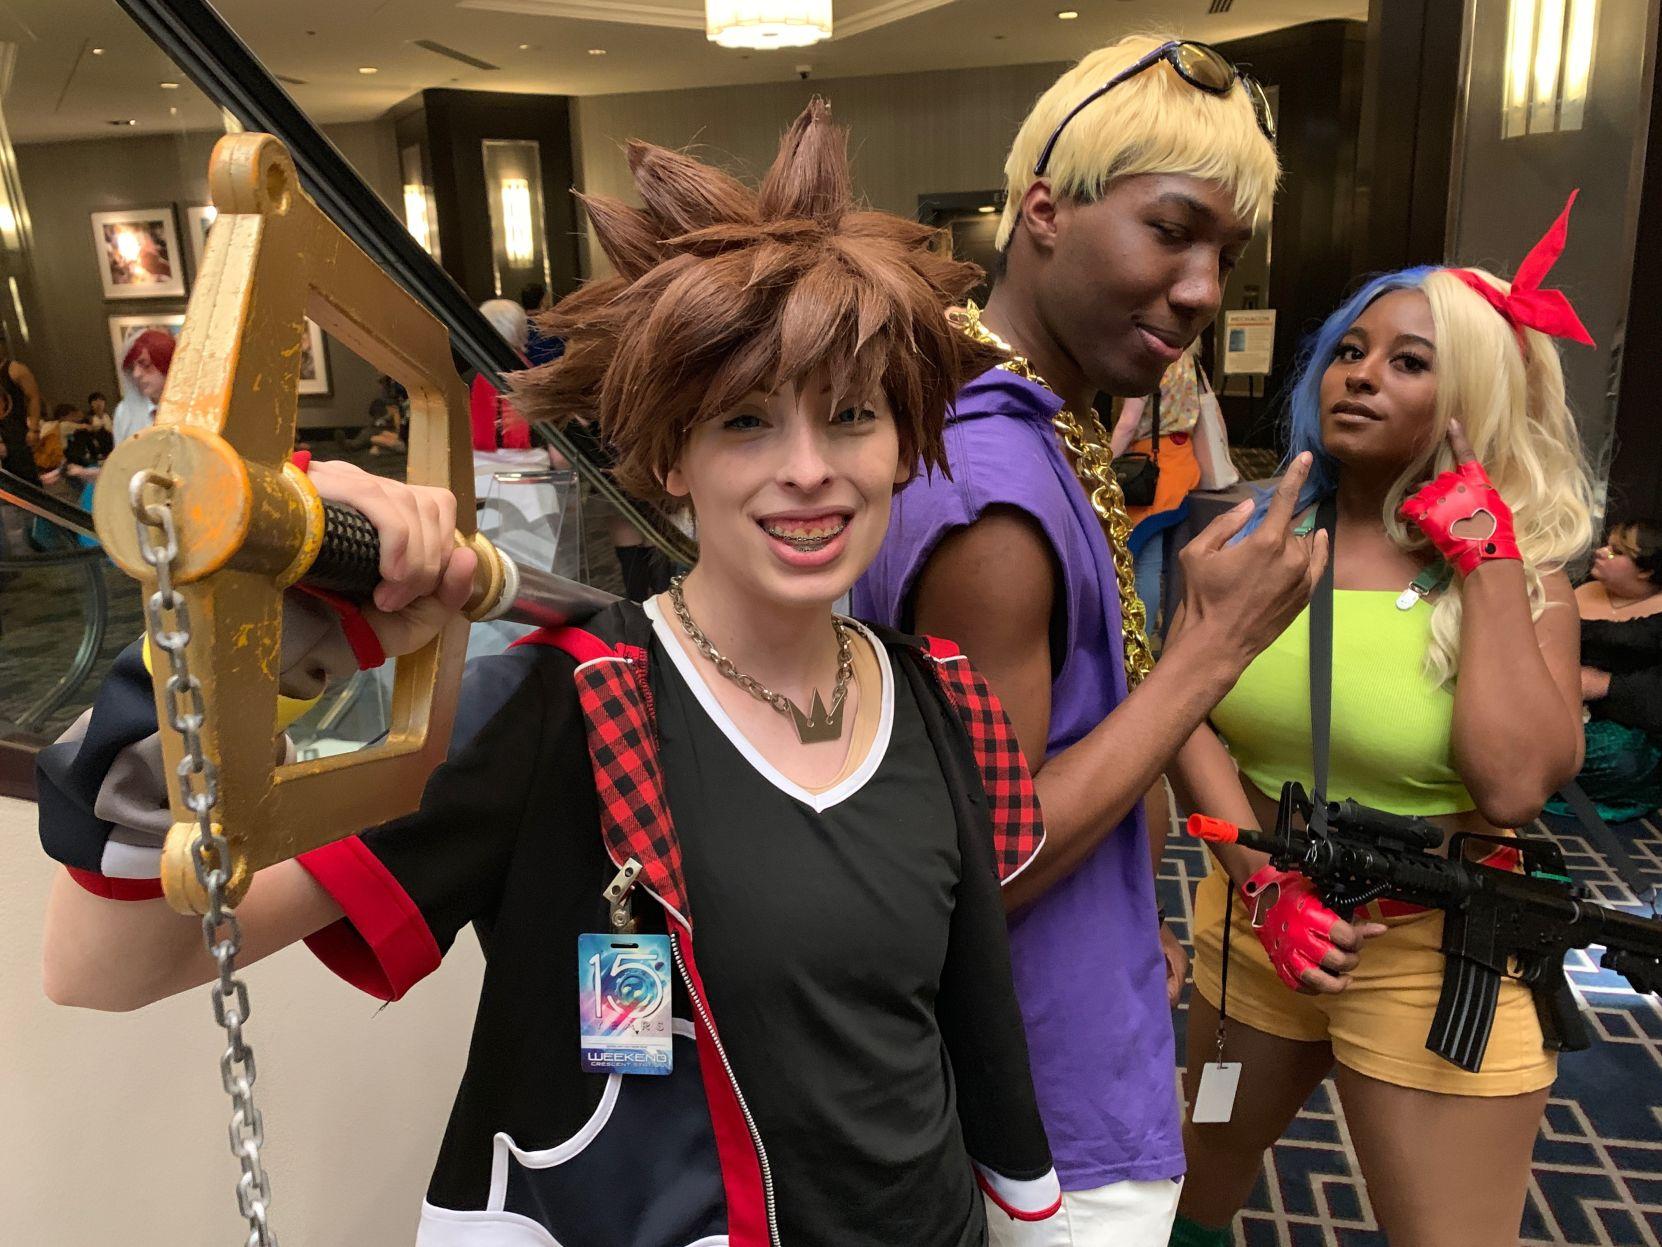 Photos, video See some of the best anime cosplay costumes at MechaCon